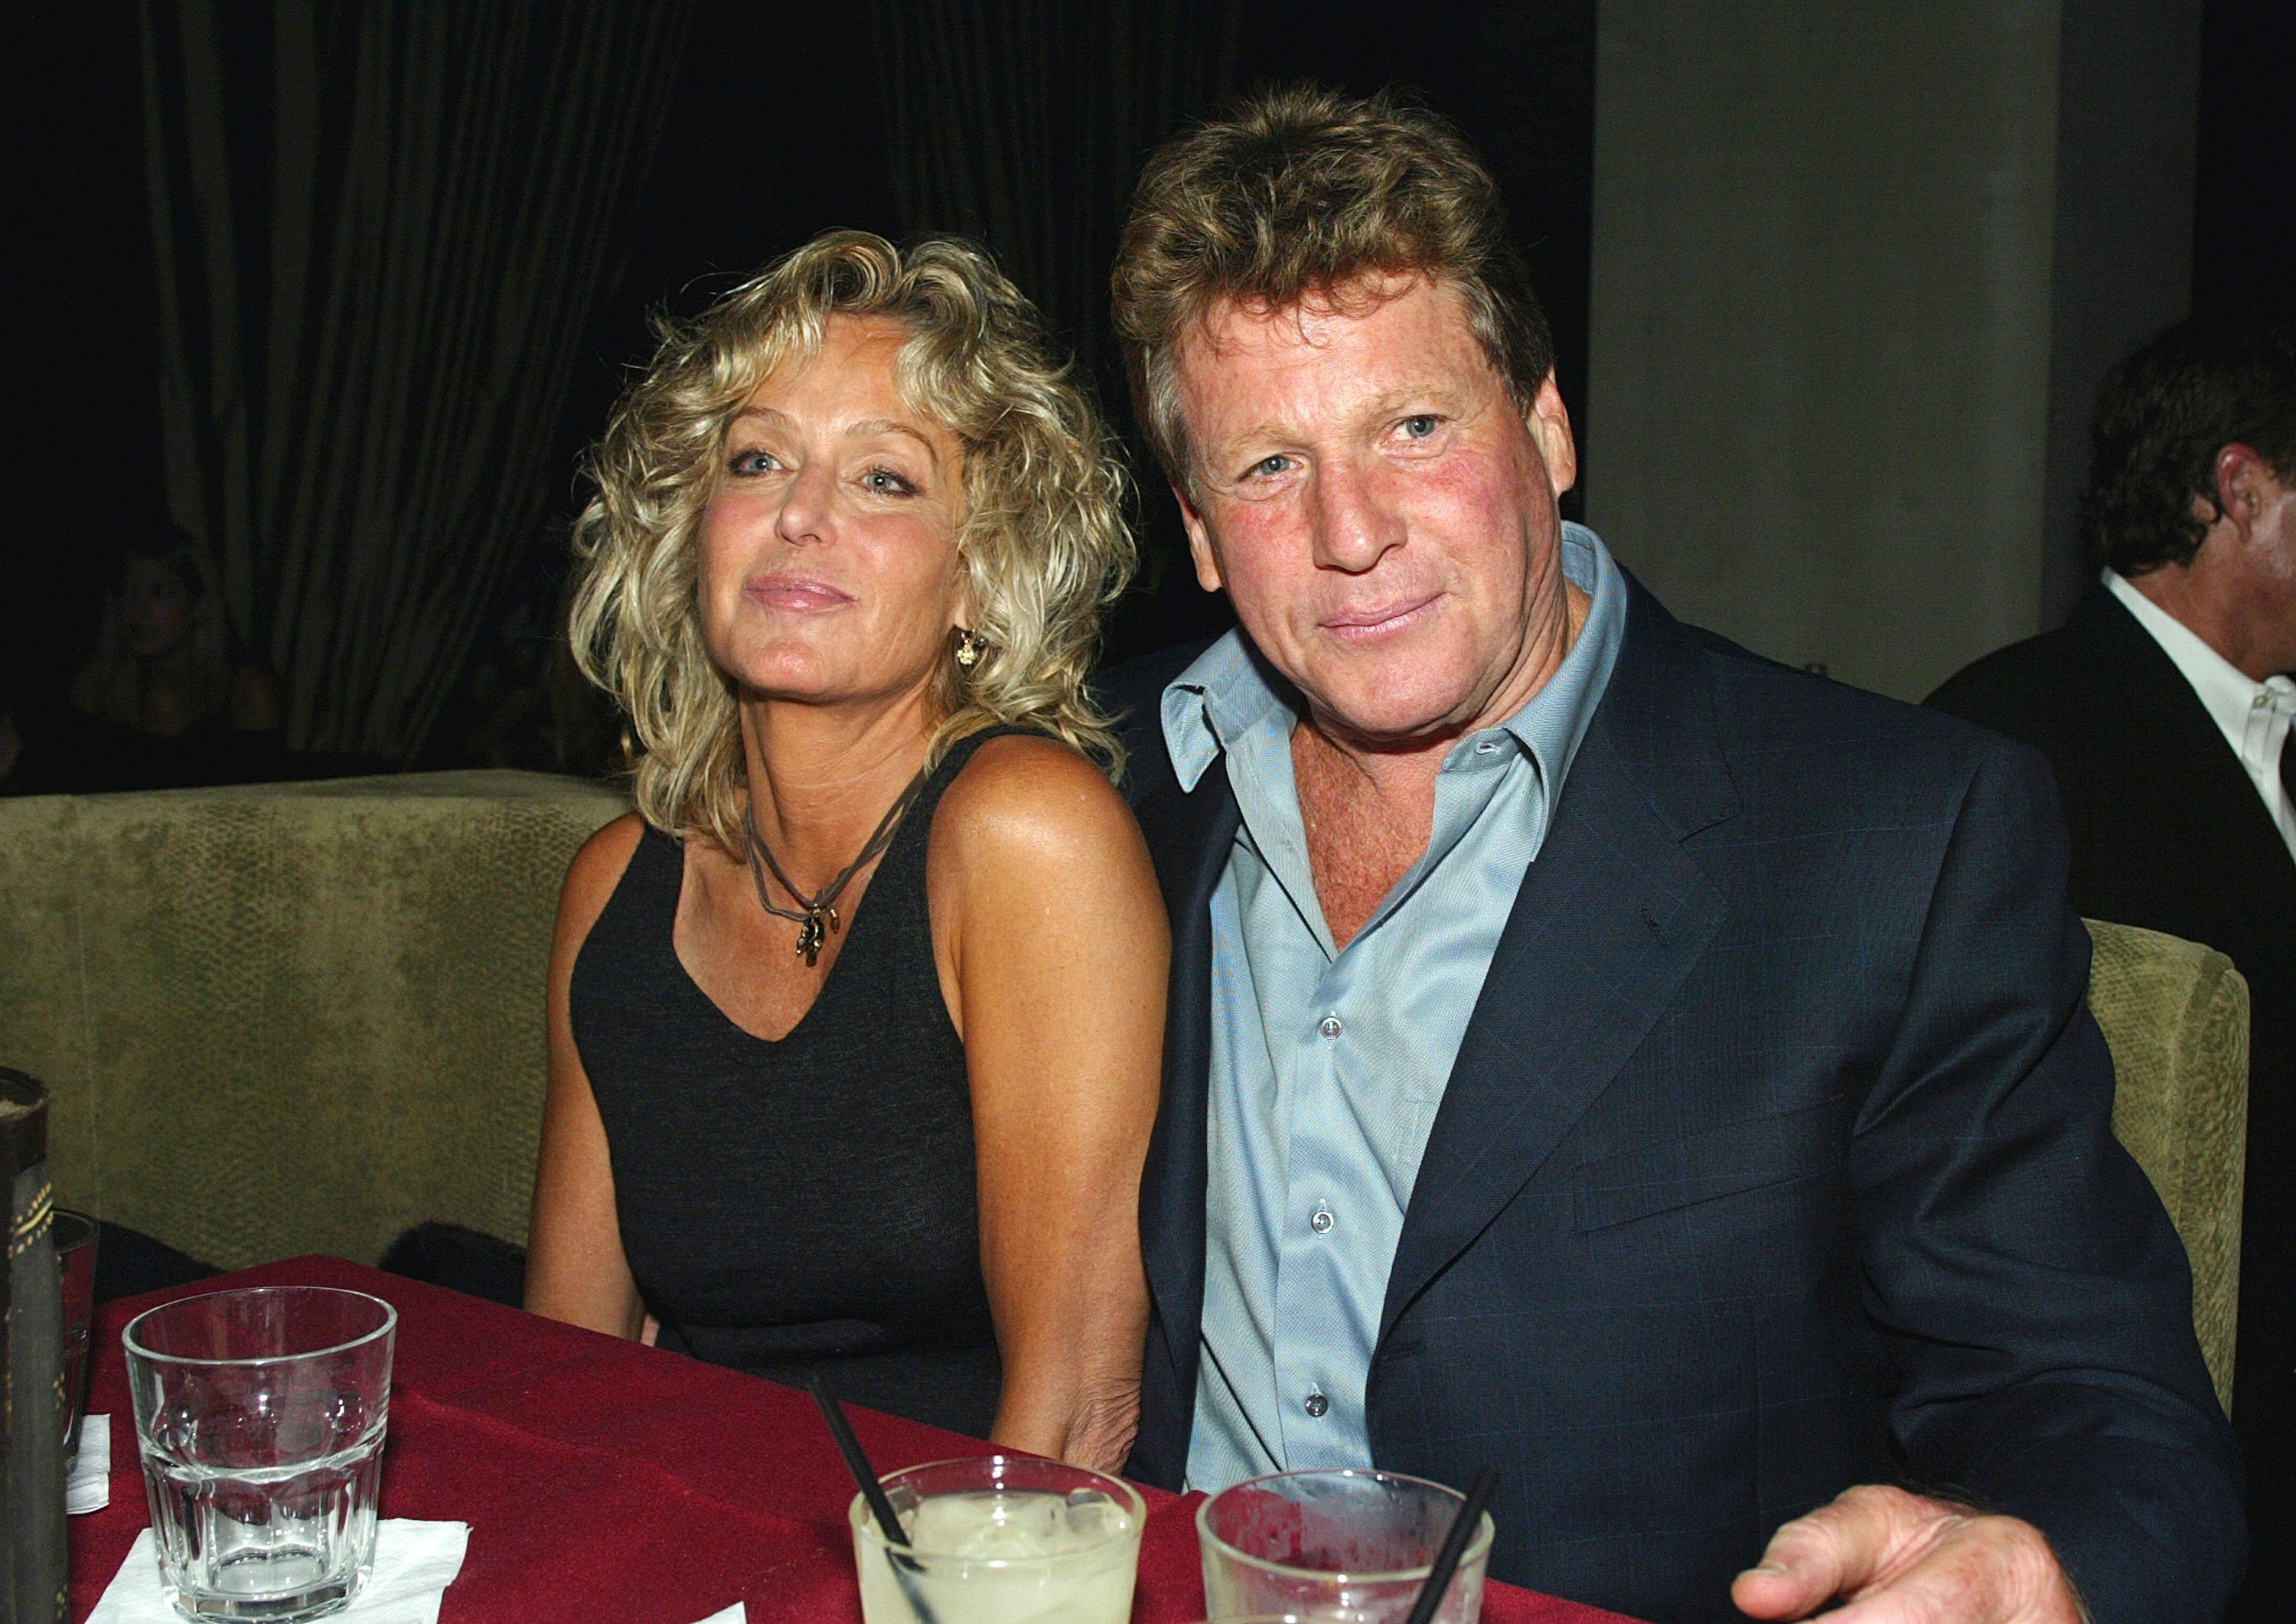 Farrah Fawcett and Ryan O'Neal at the Highlands on April 10, 2003 in Los Angeles, California | Photo: Getty Images